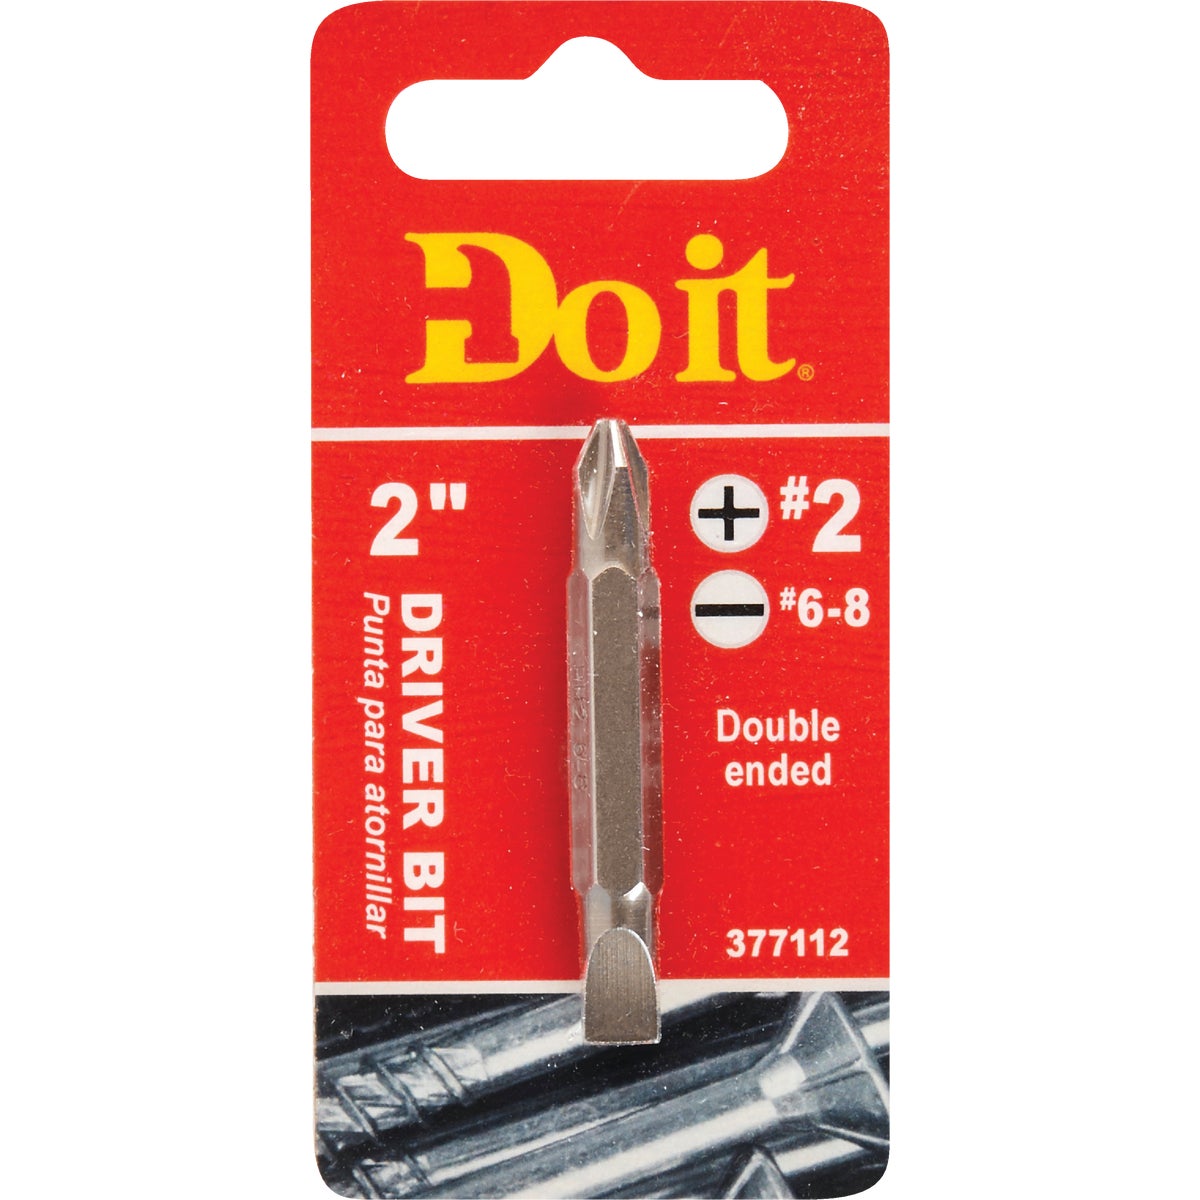 Do it Phillips #2 Slotted Double-End Screwdriver Bit